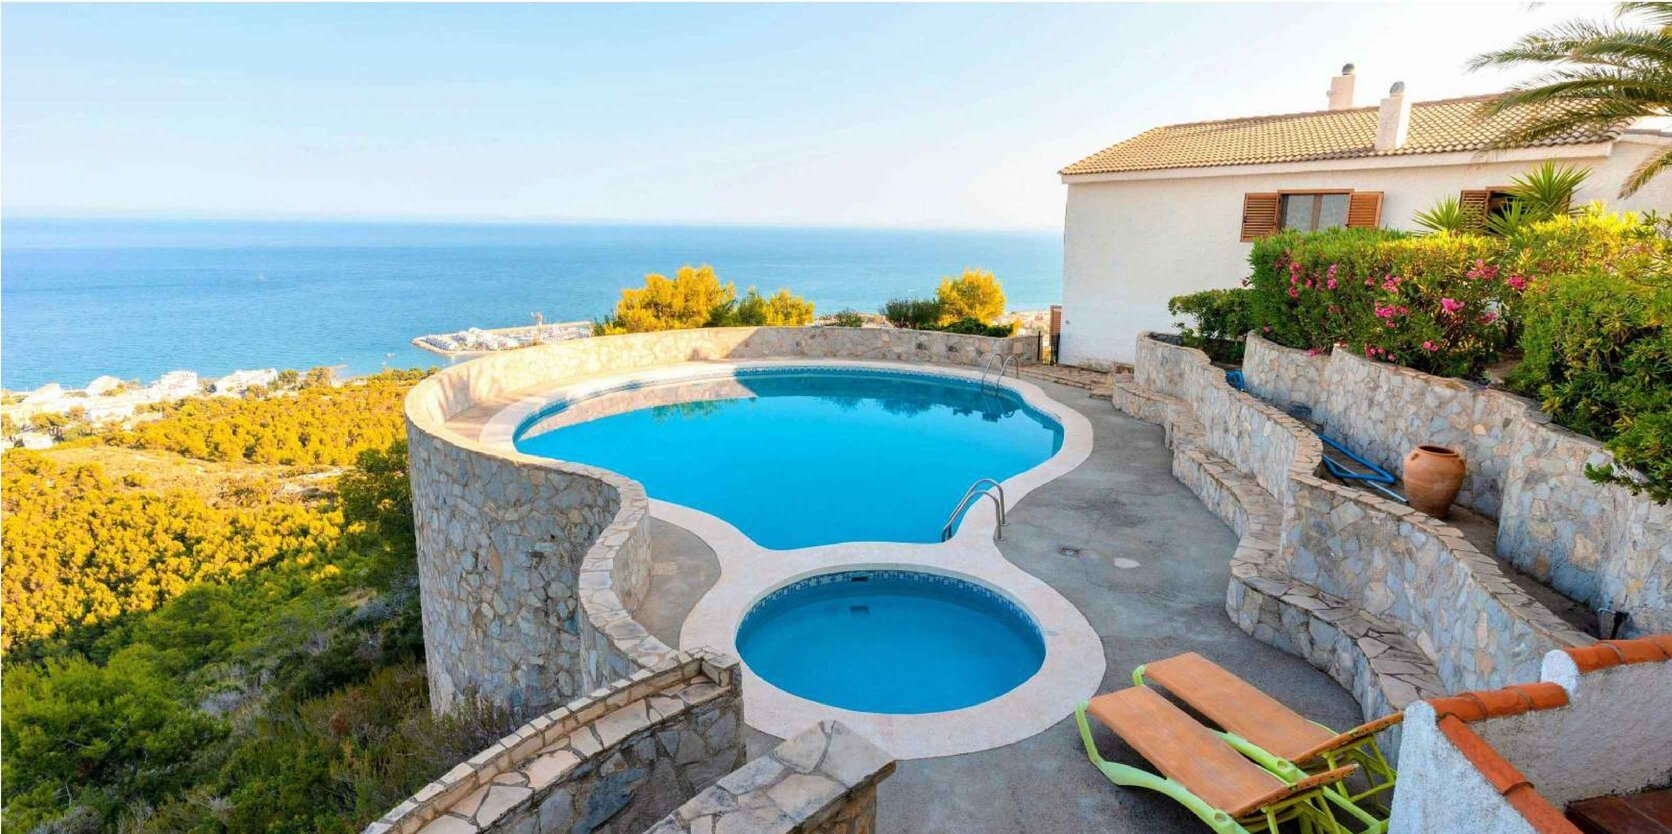 Guests relaxing in a private pool at Breizas, a luxury vacation rental